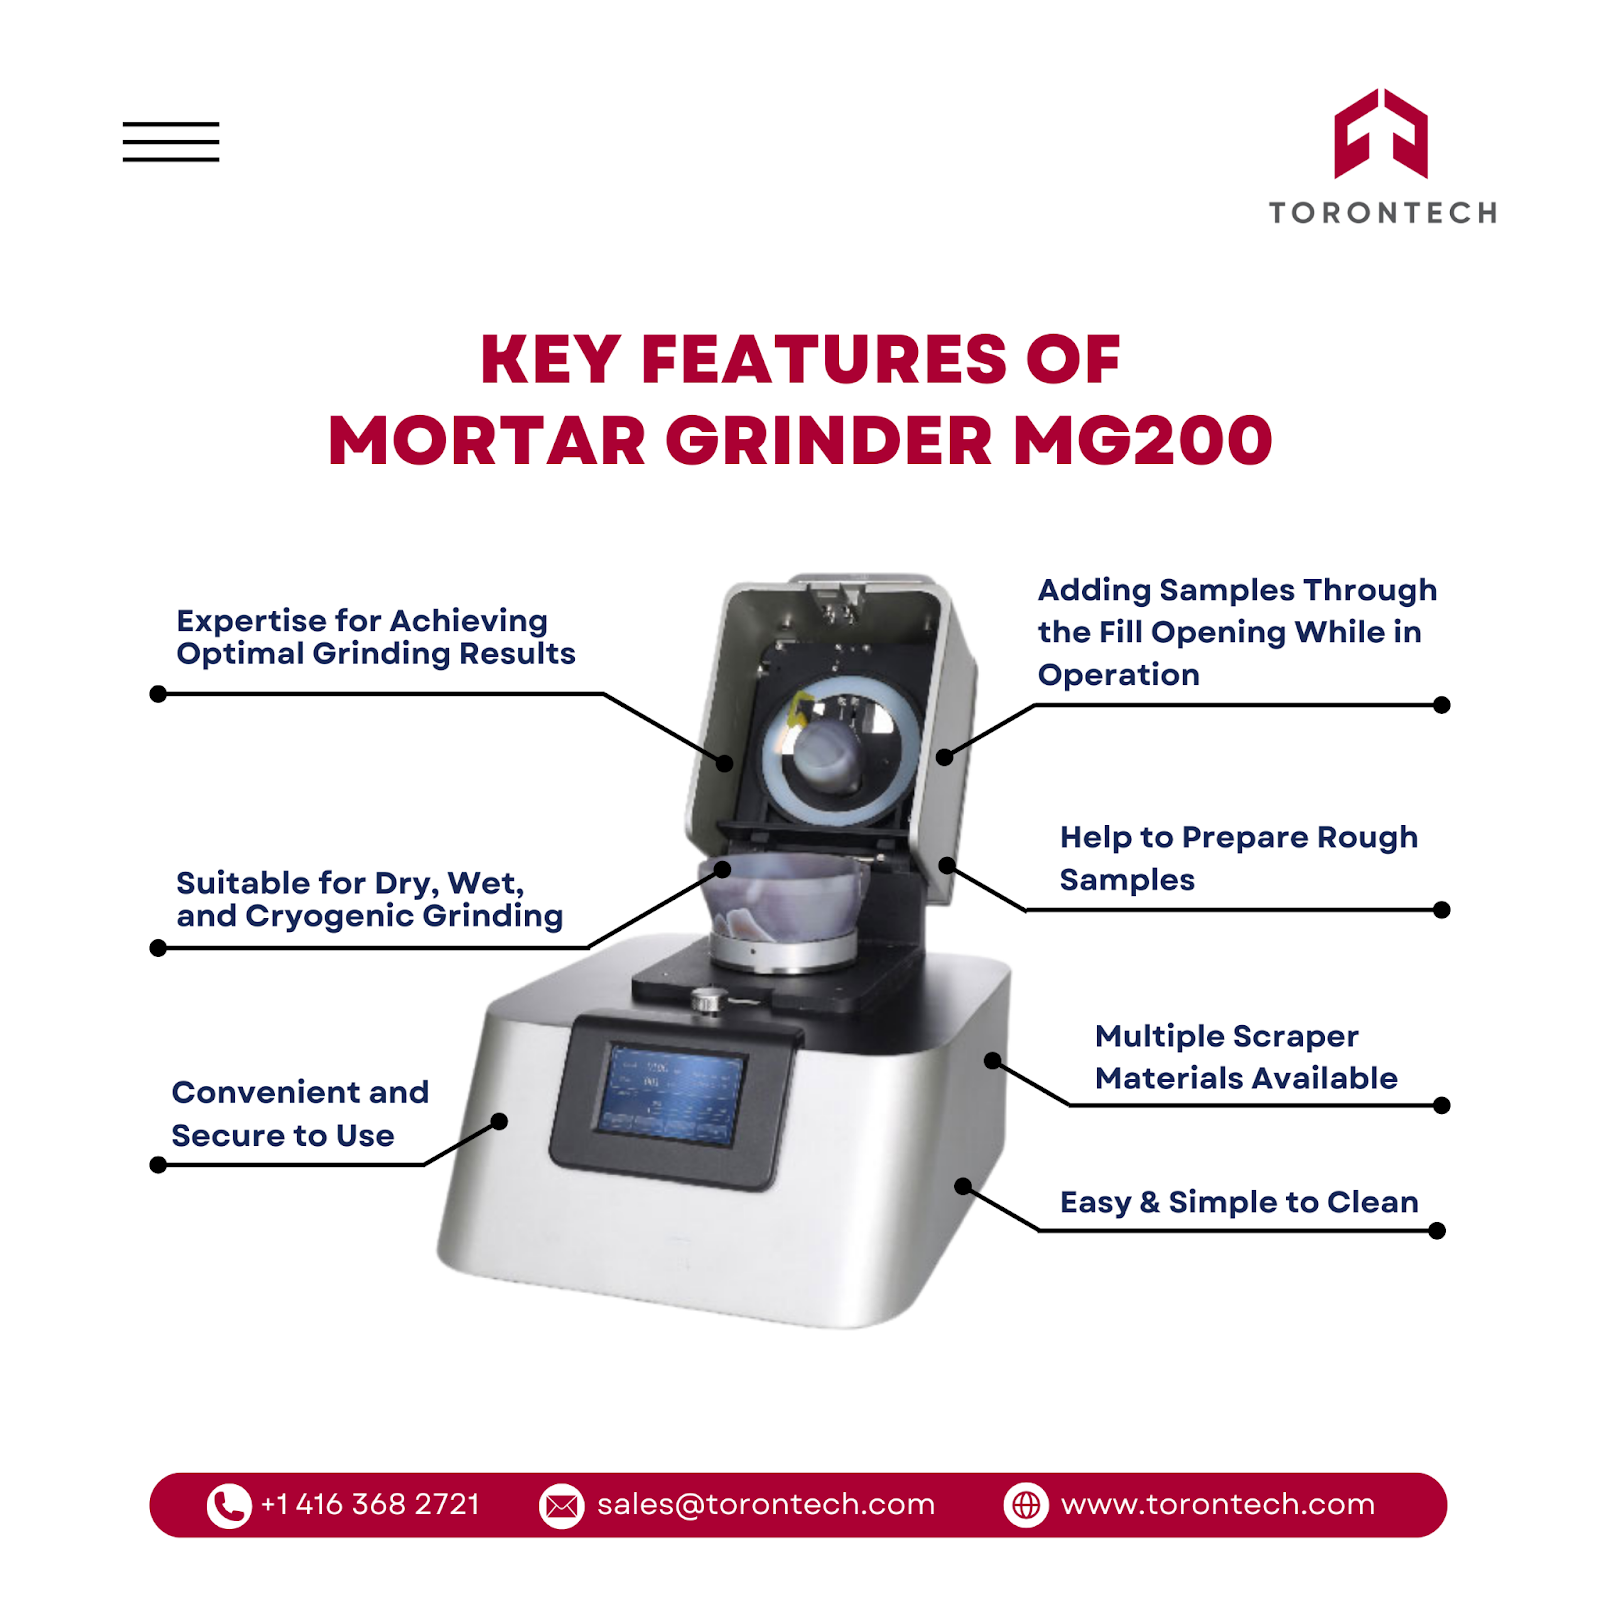 Key Features of Mortar Grinder MG200